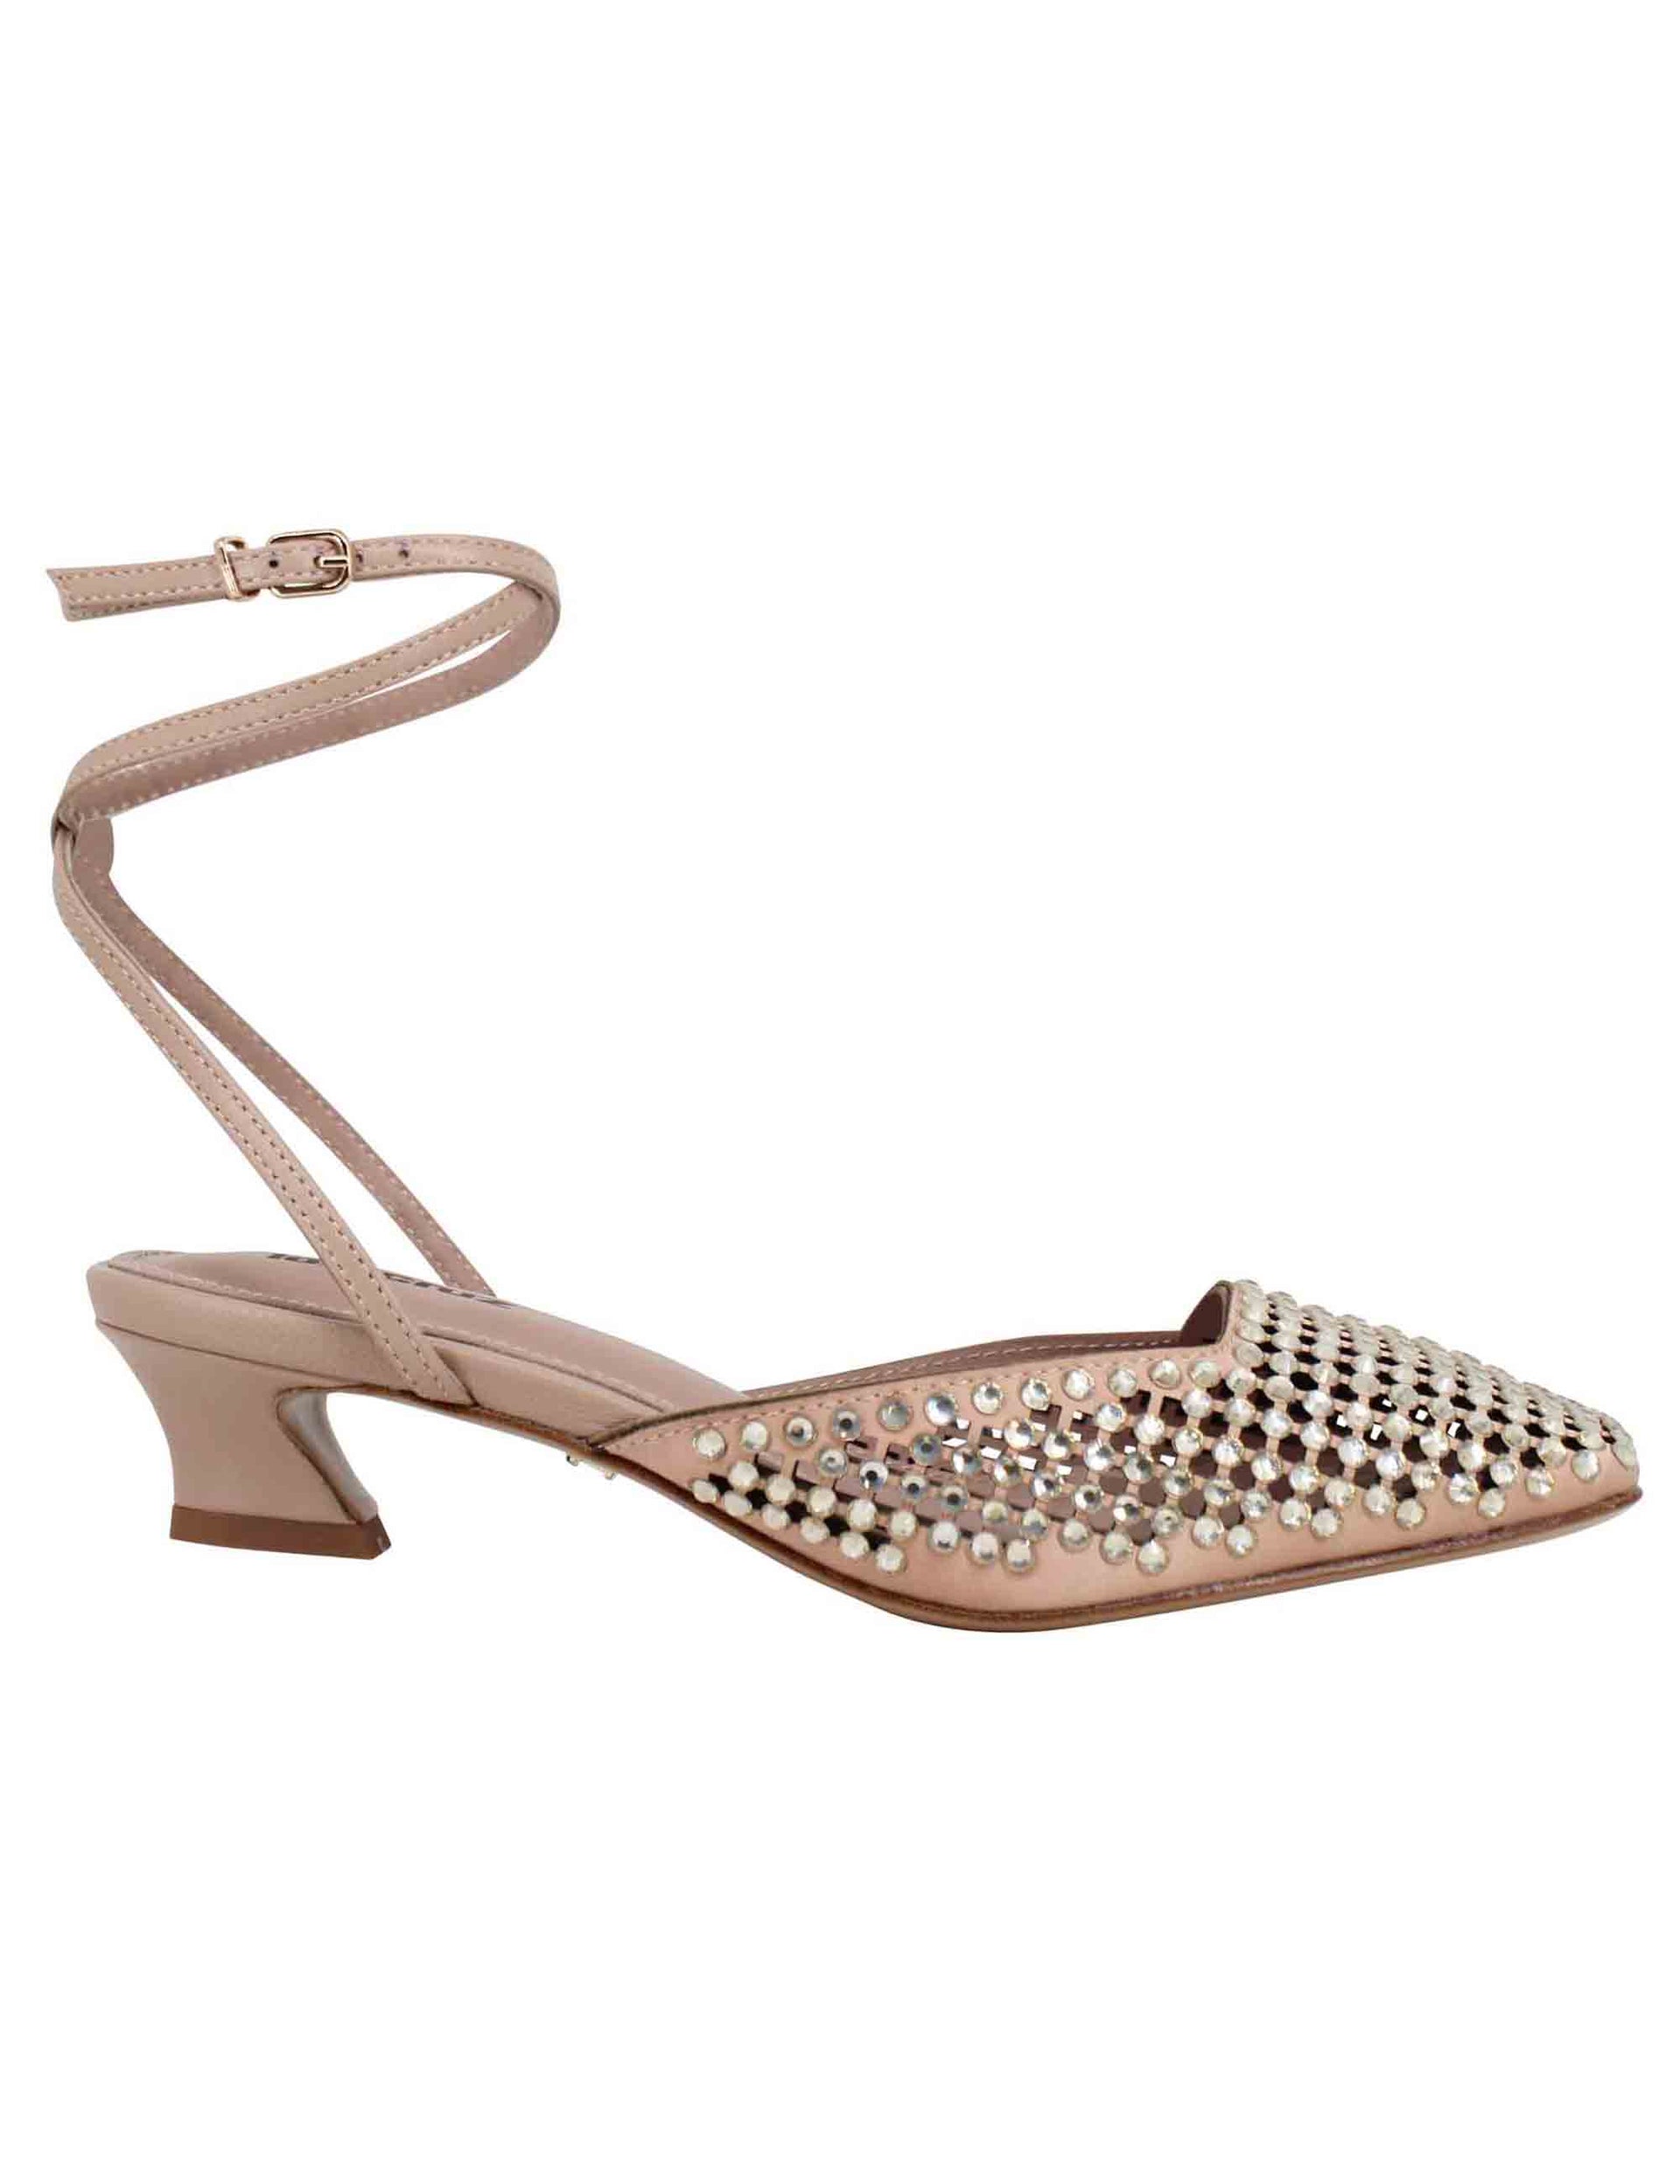 Women's slingback sandals in nude leather with rhinestones and low heel Pia